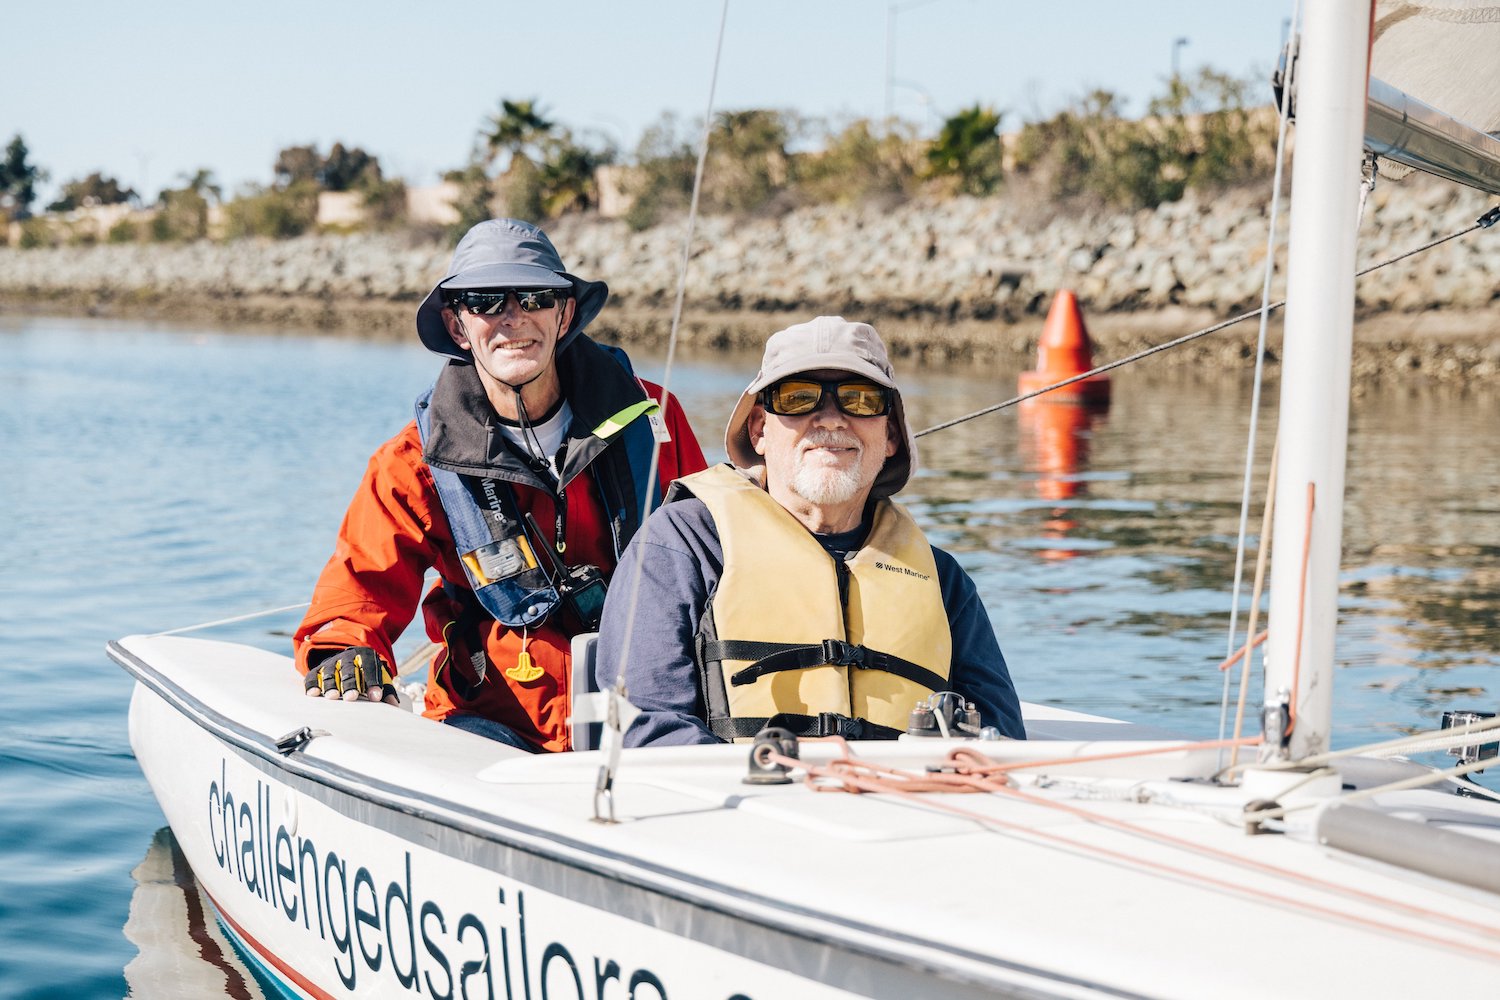 Two disabled men sailing together in the San Diego Bay with the Challenged Sailors San Diego organization